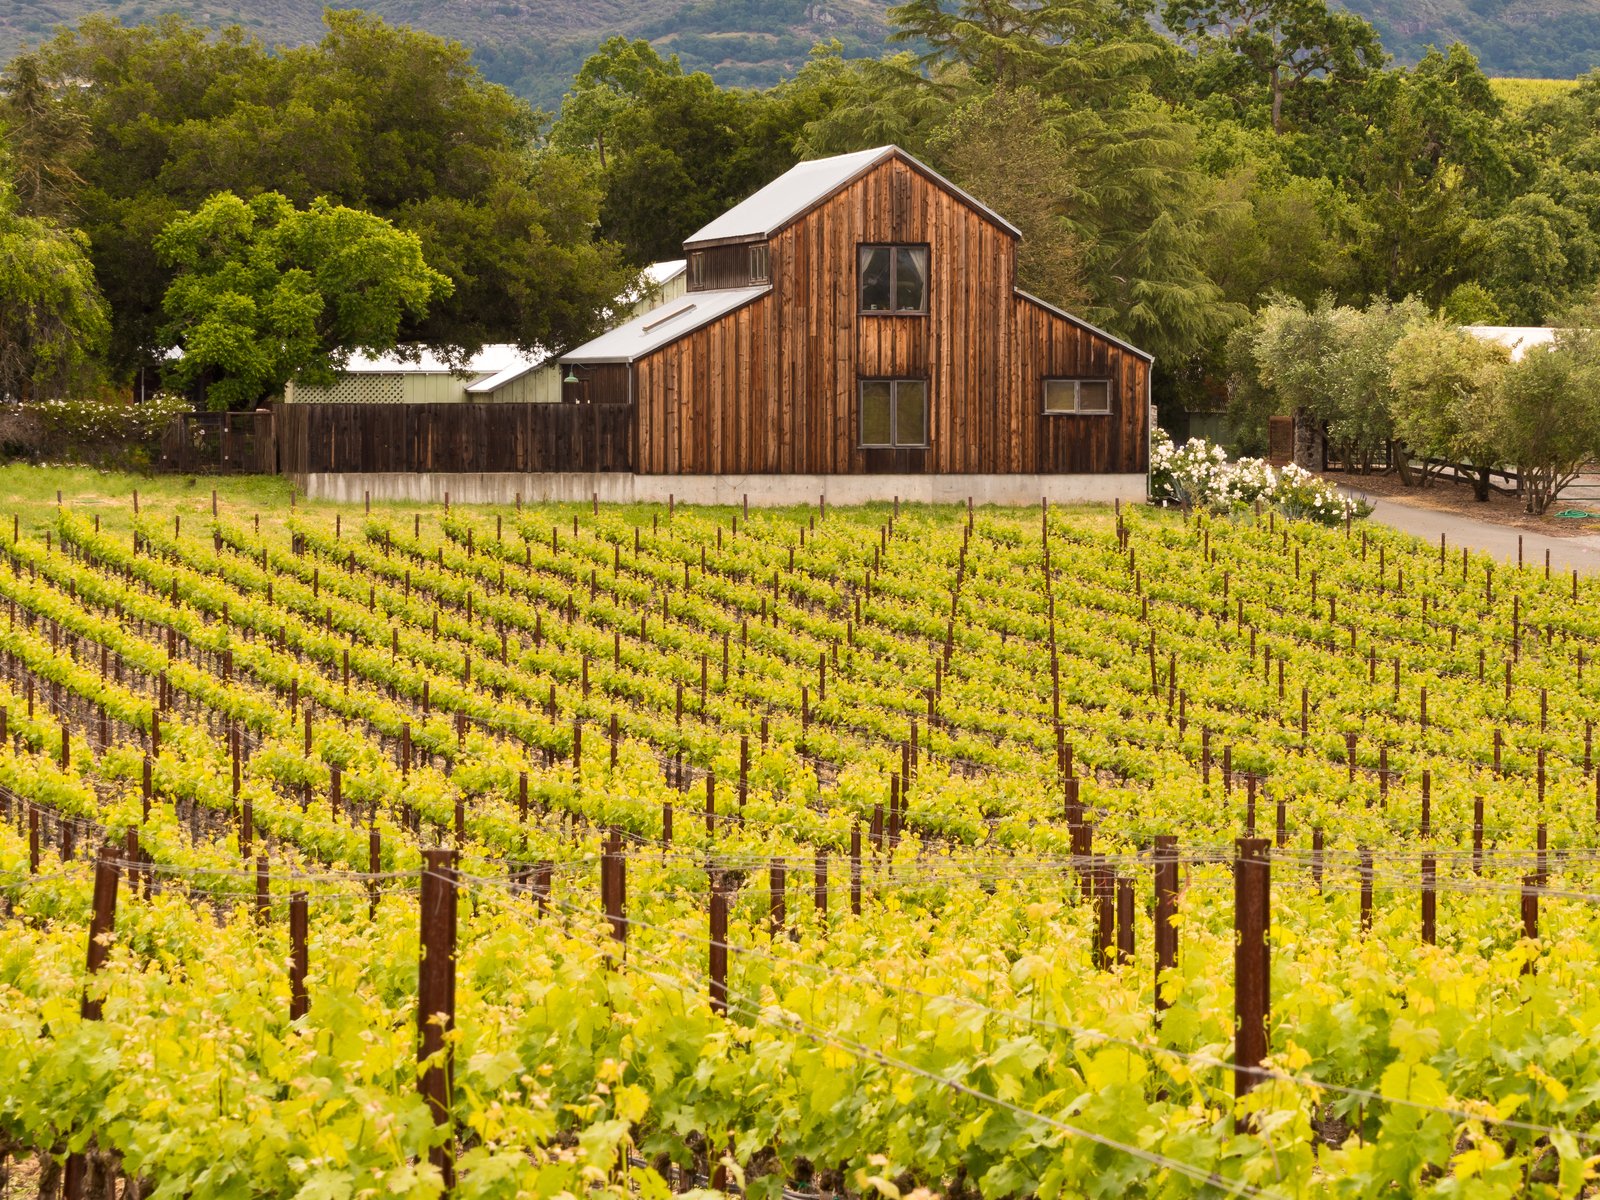 Shafer Vineyards is best known for its Hillside Select&nbsp;Cabernet Sauvignon